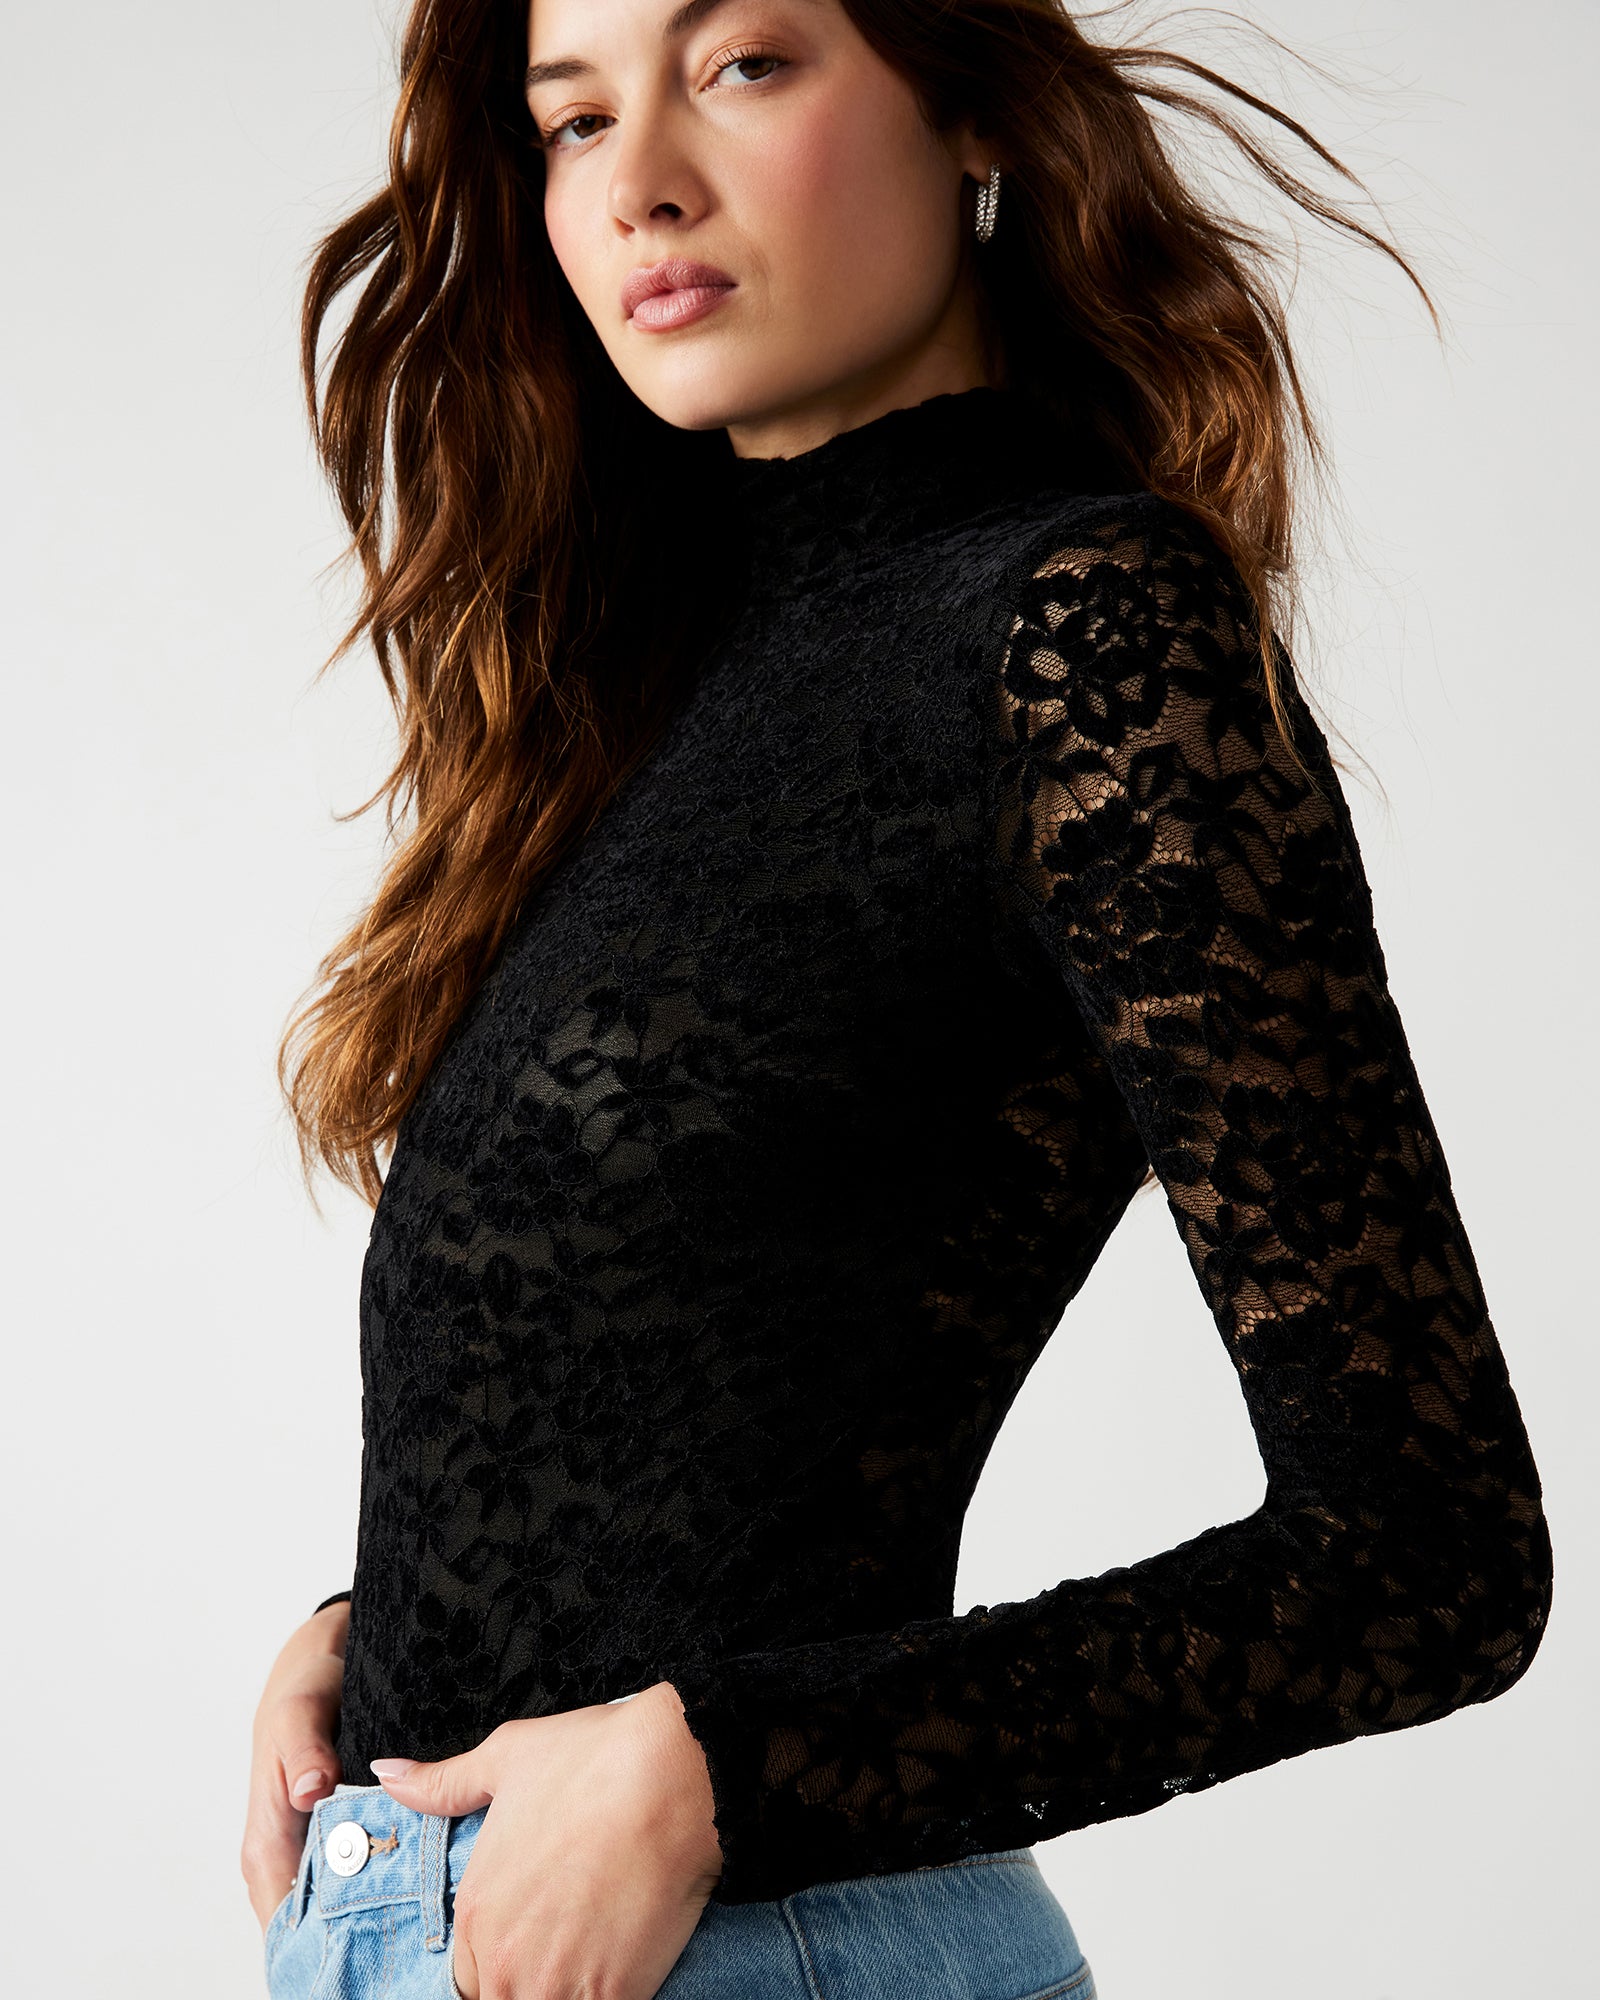 Sheer Me Out Black Lace Long Sleeve Bodysuit